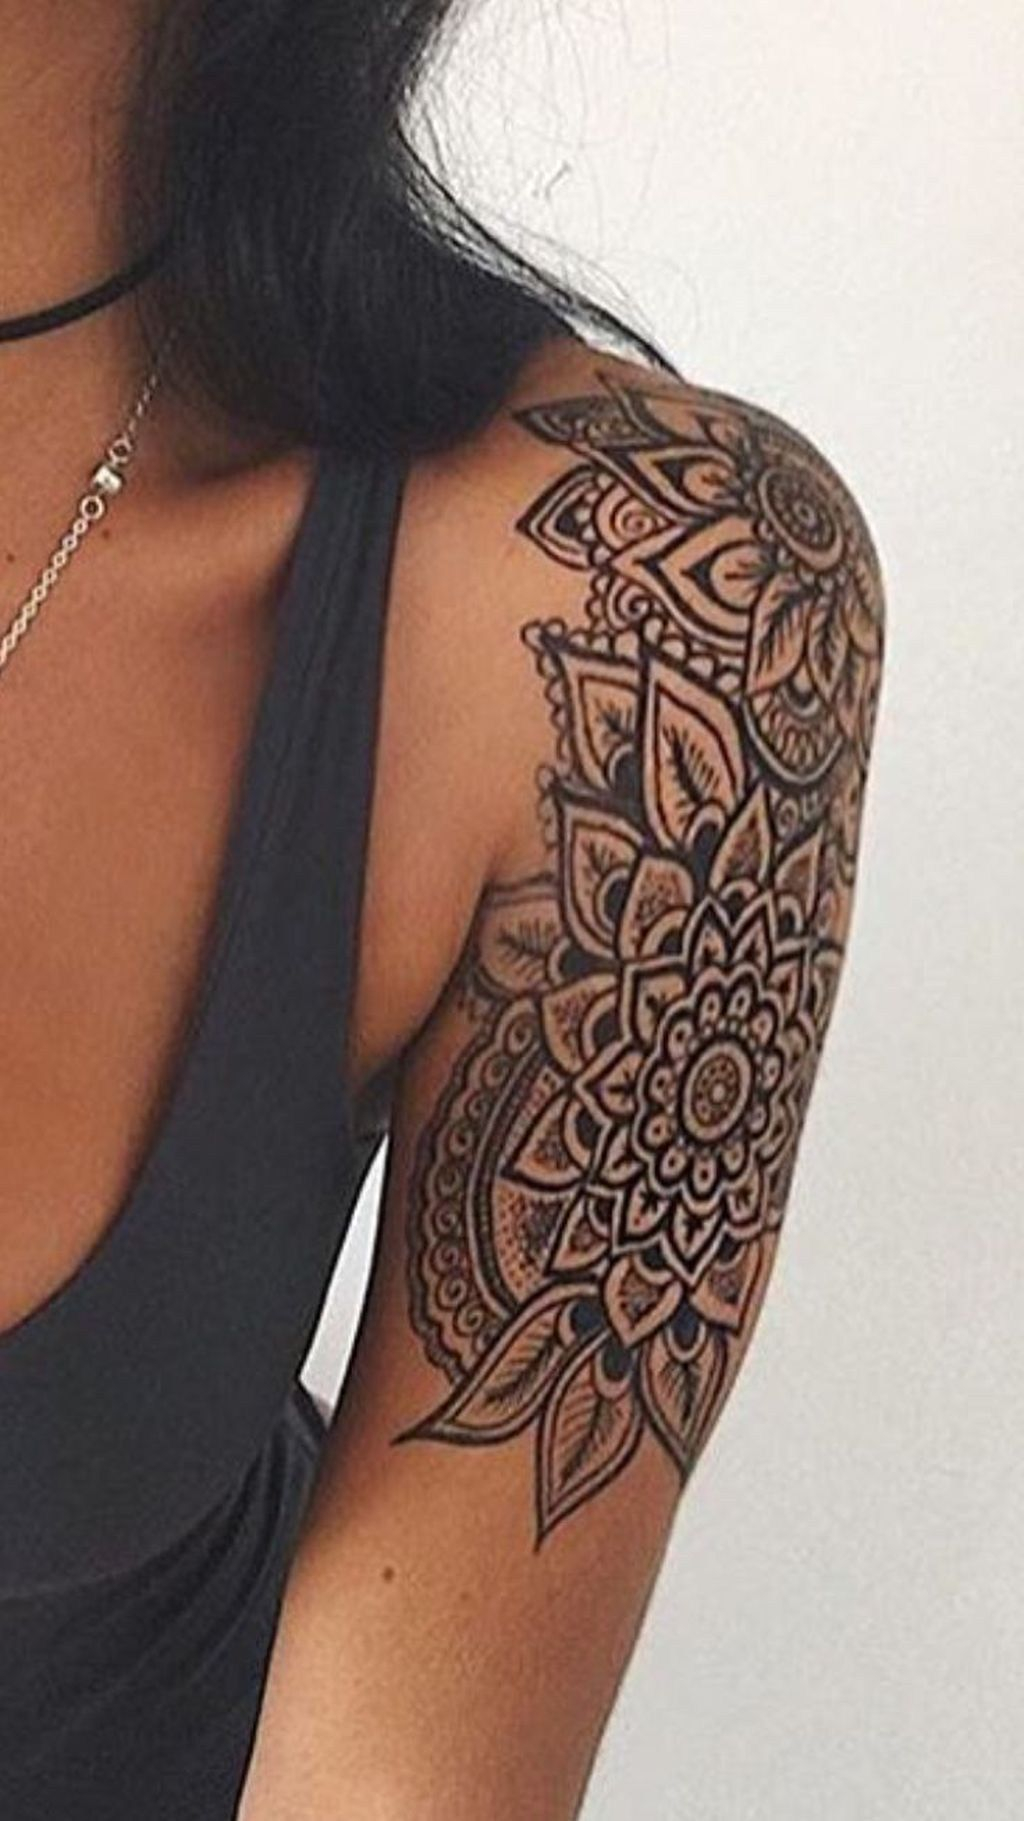 Cute Henna Lace Arm Tattoo Ideas You Should Try 17 Tattooyou throughout dimensions 1024 X 1821